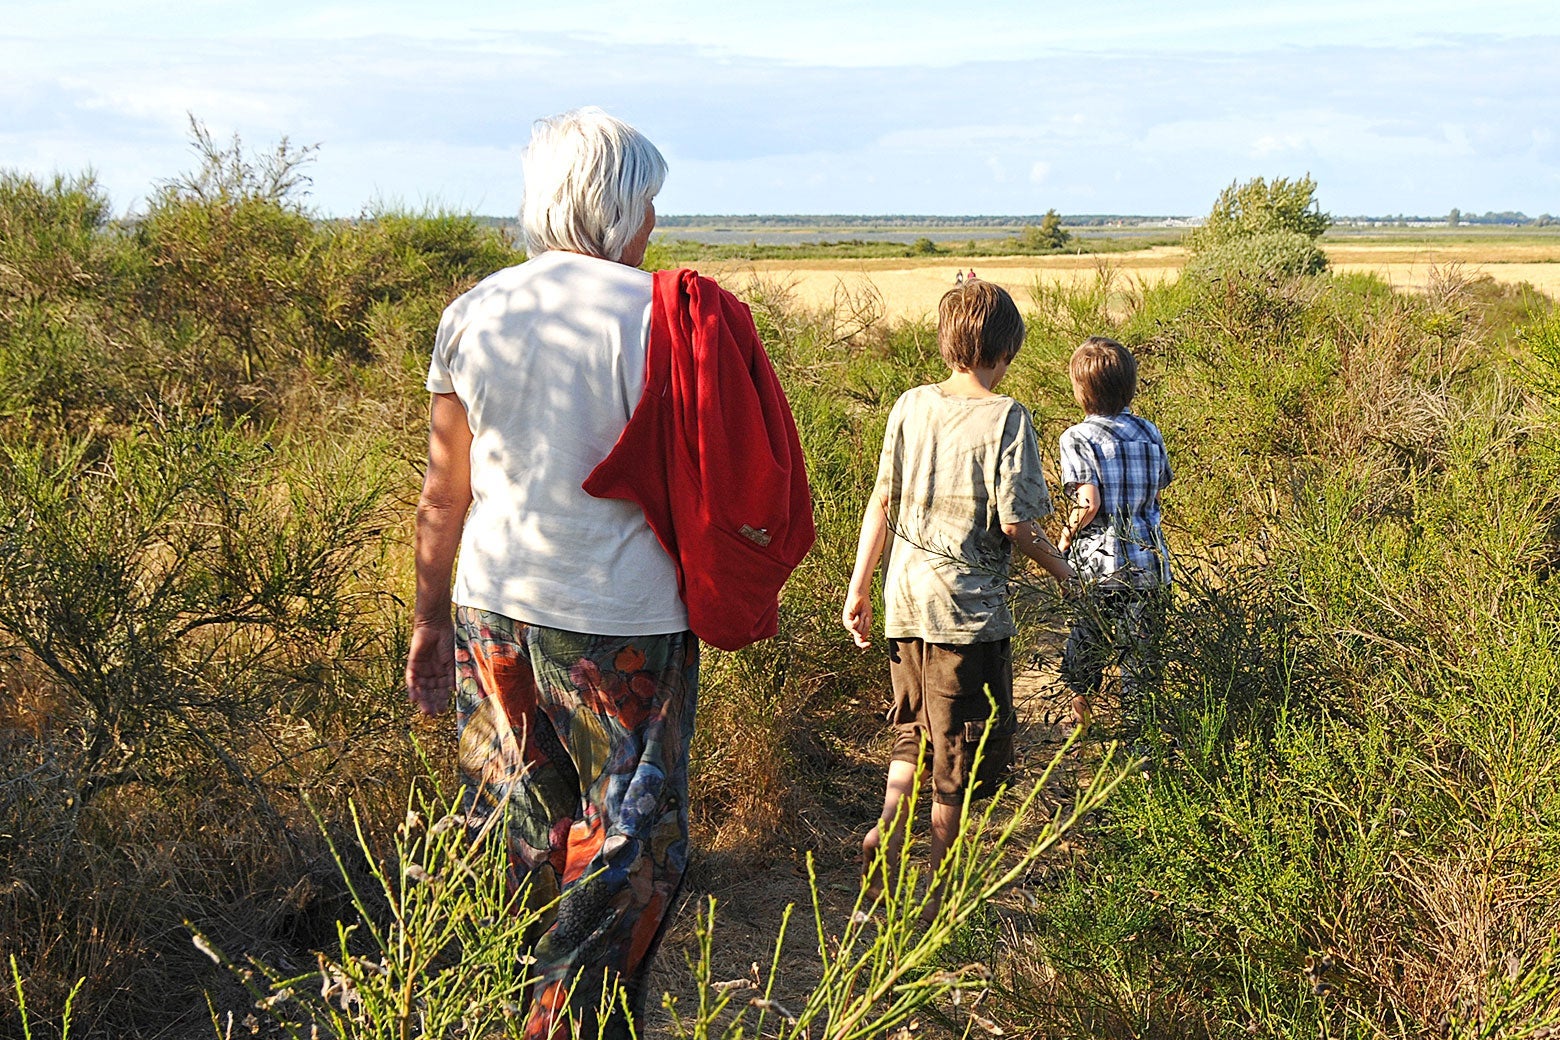 A grandmother keeping her distance while hiking with two grandchildren.